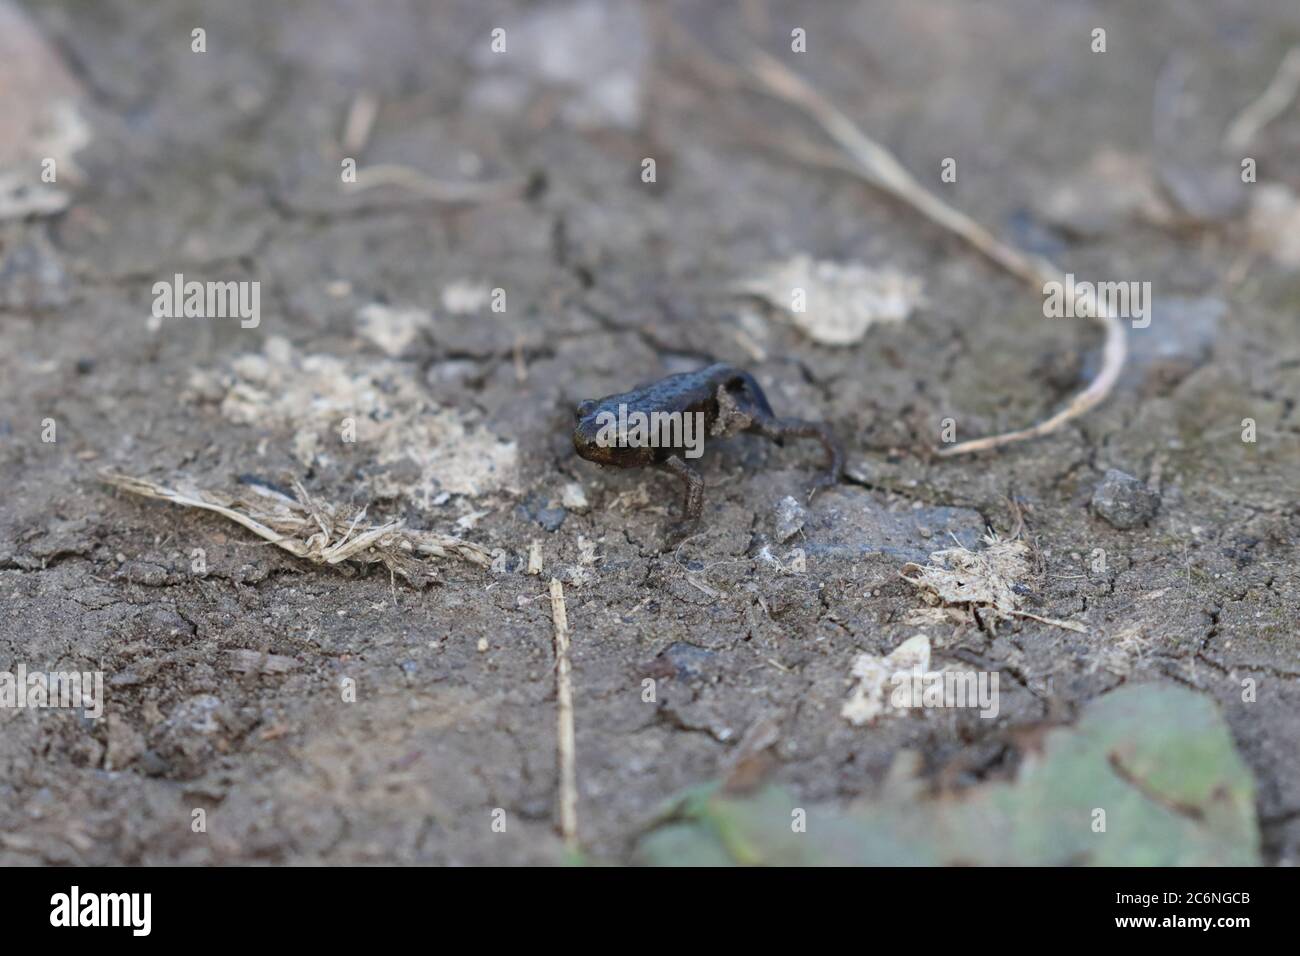 Close up image of a Baby Frog standing on some soil. Stock Photo